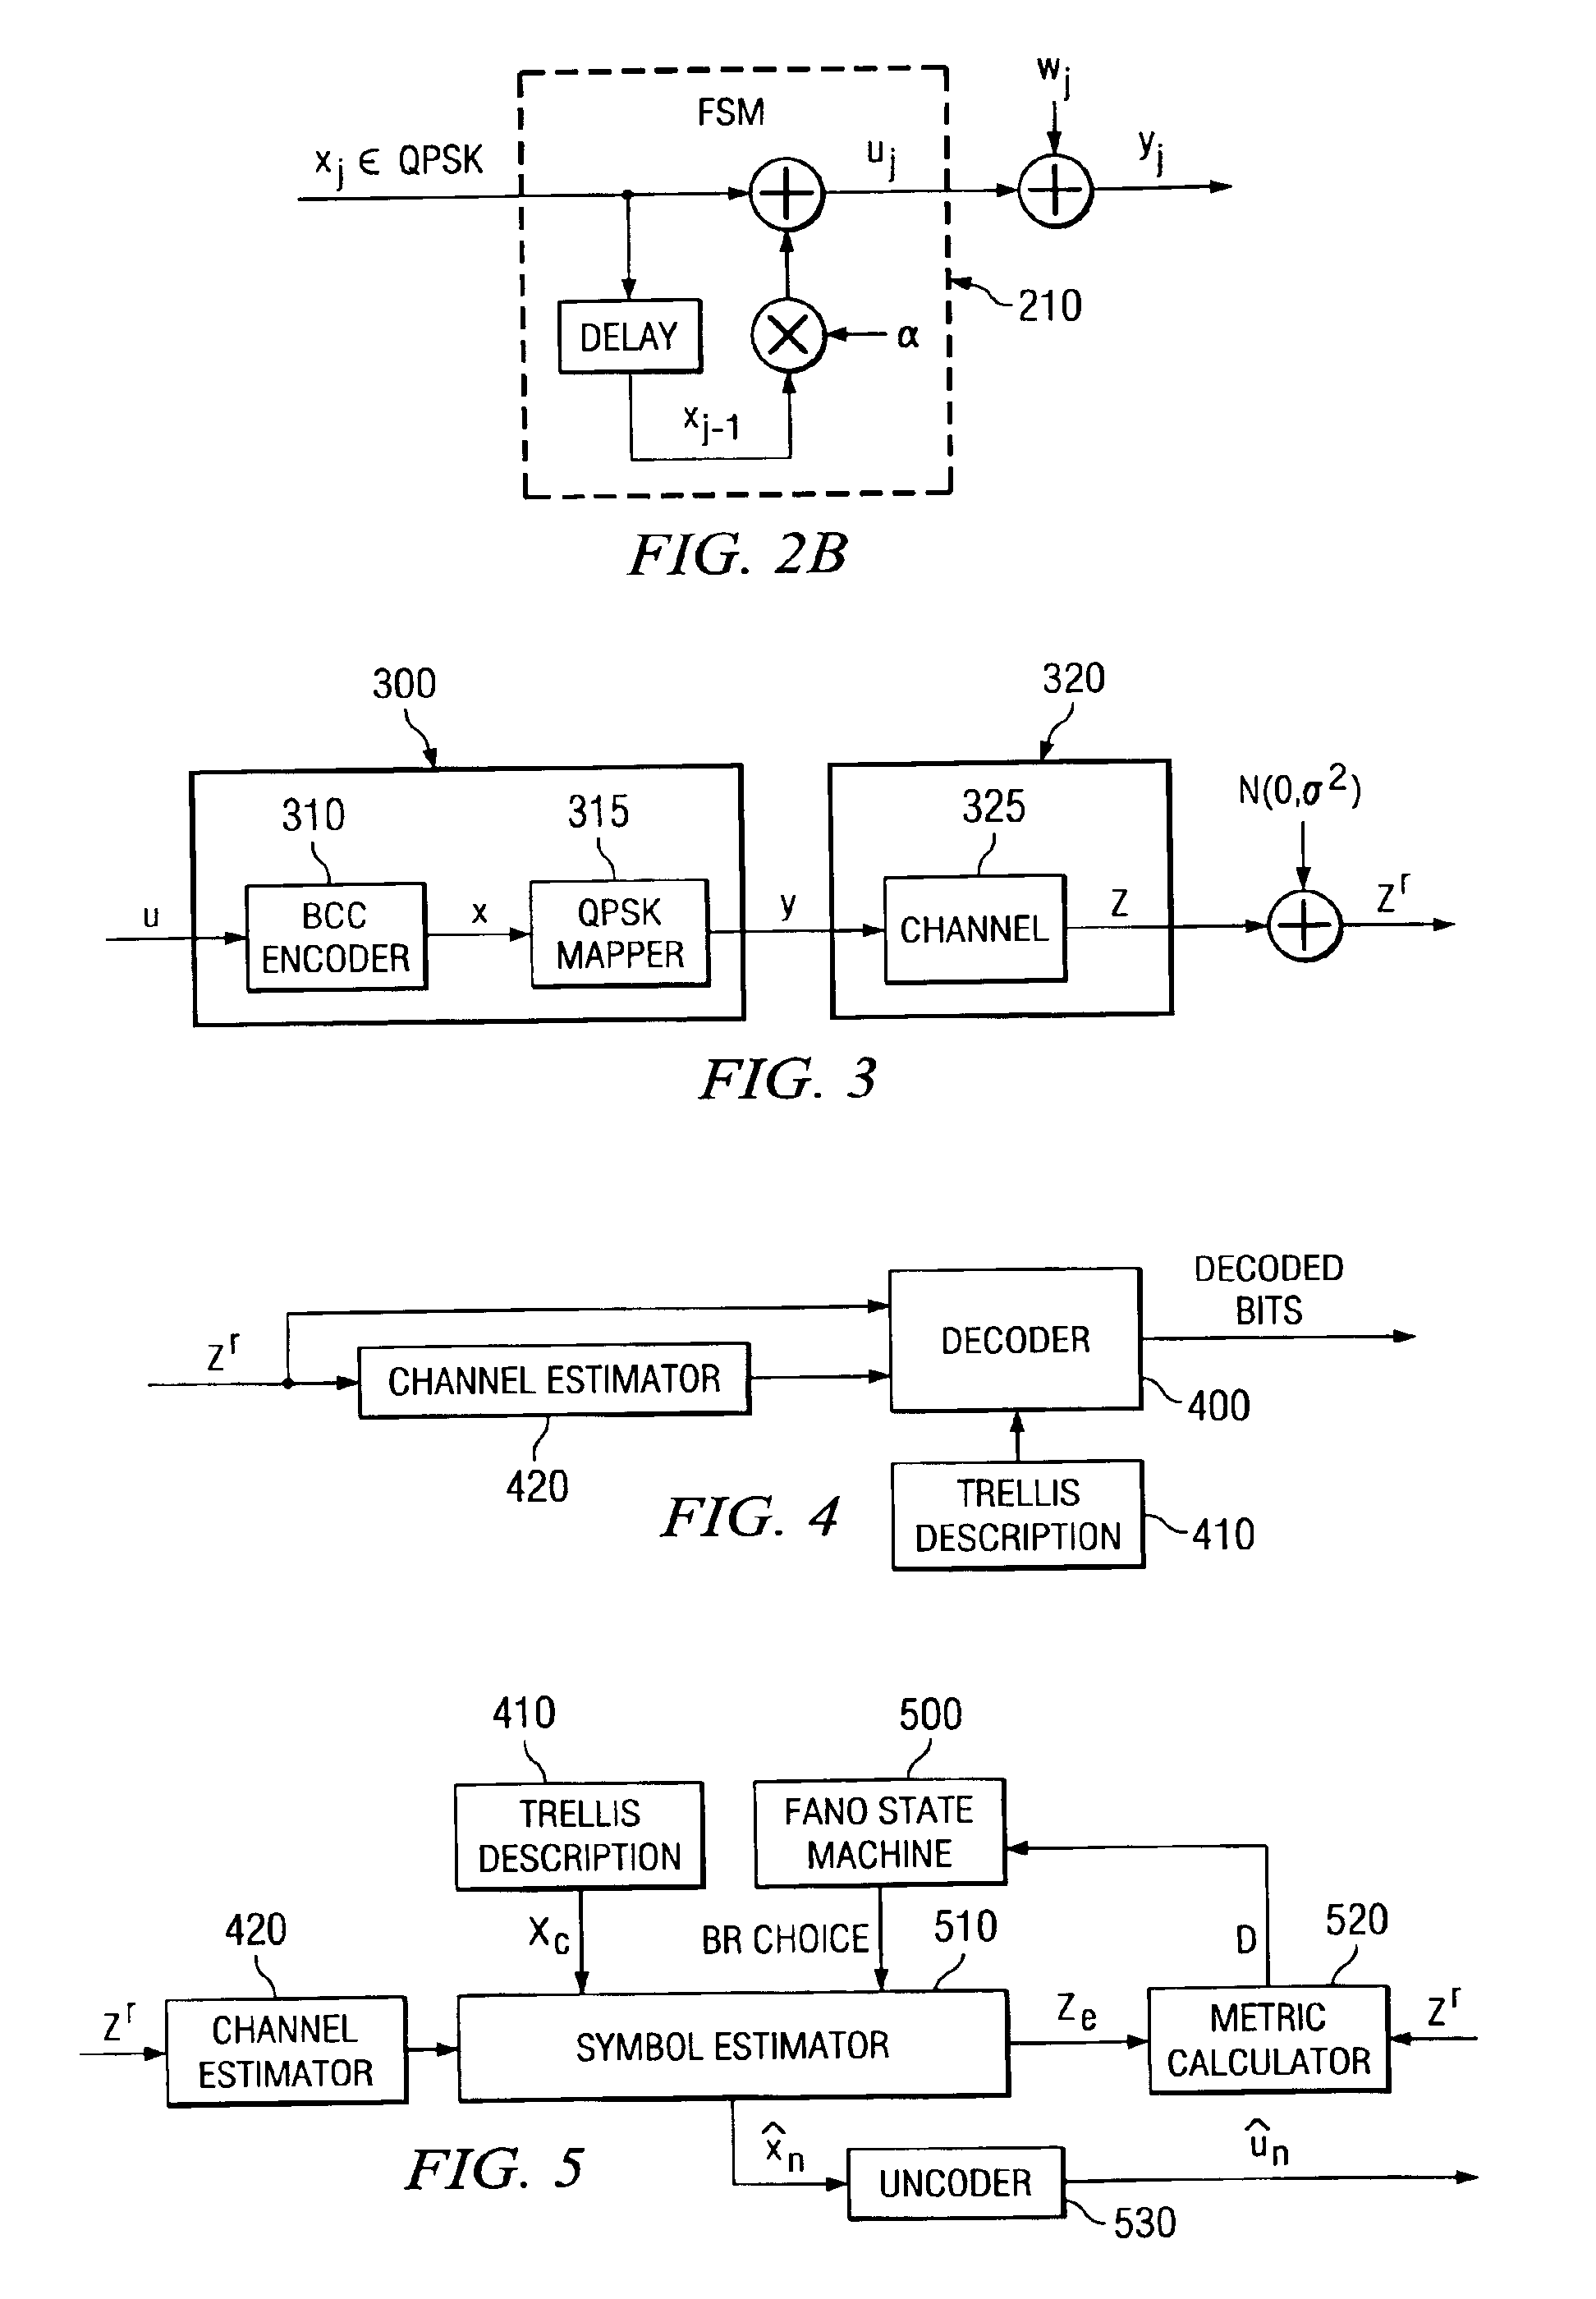 Joint equalization and decoding using a search-based decoding algorithm